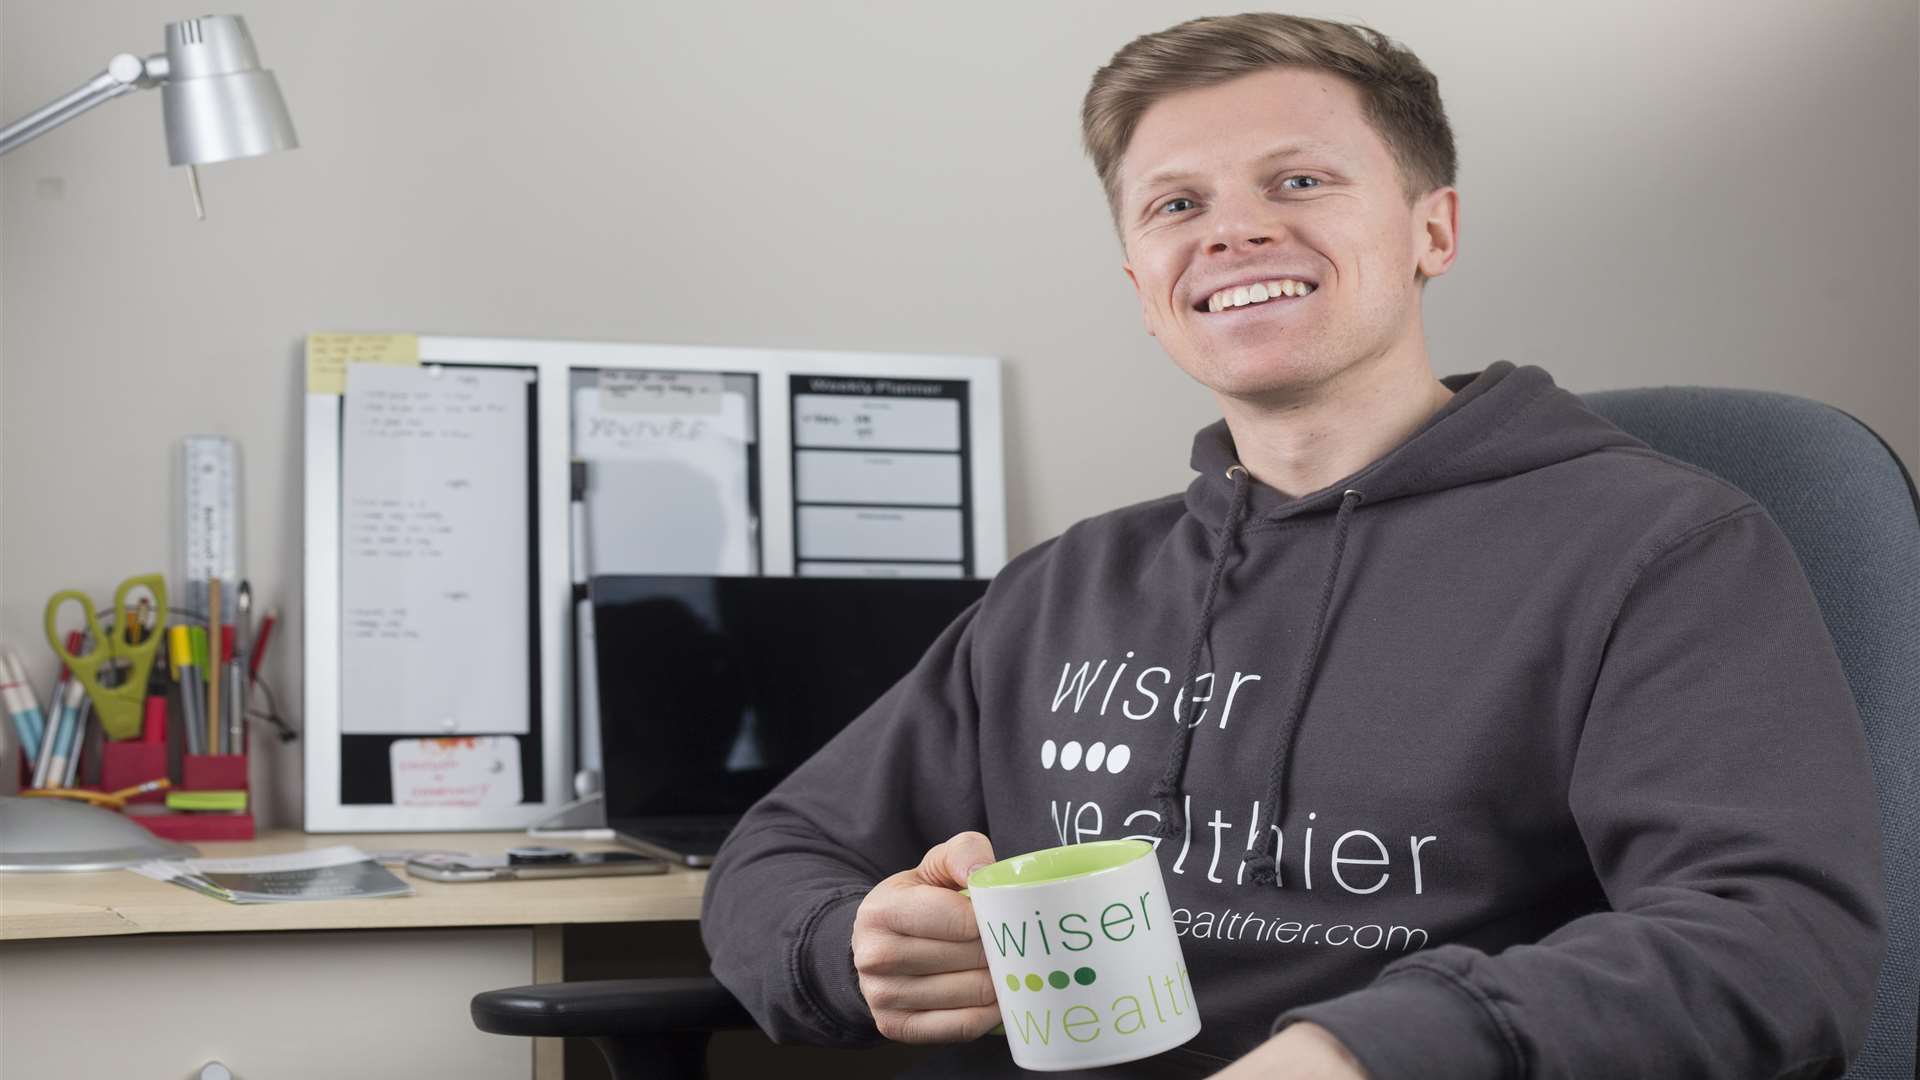 Carl Lincoln has launched personal finance firm Wiser Wealthier